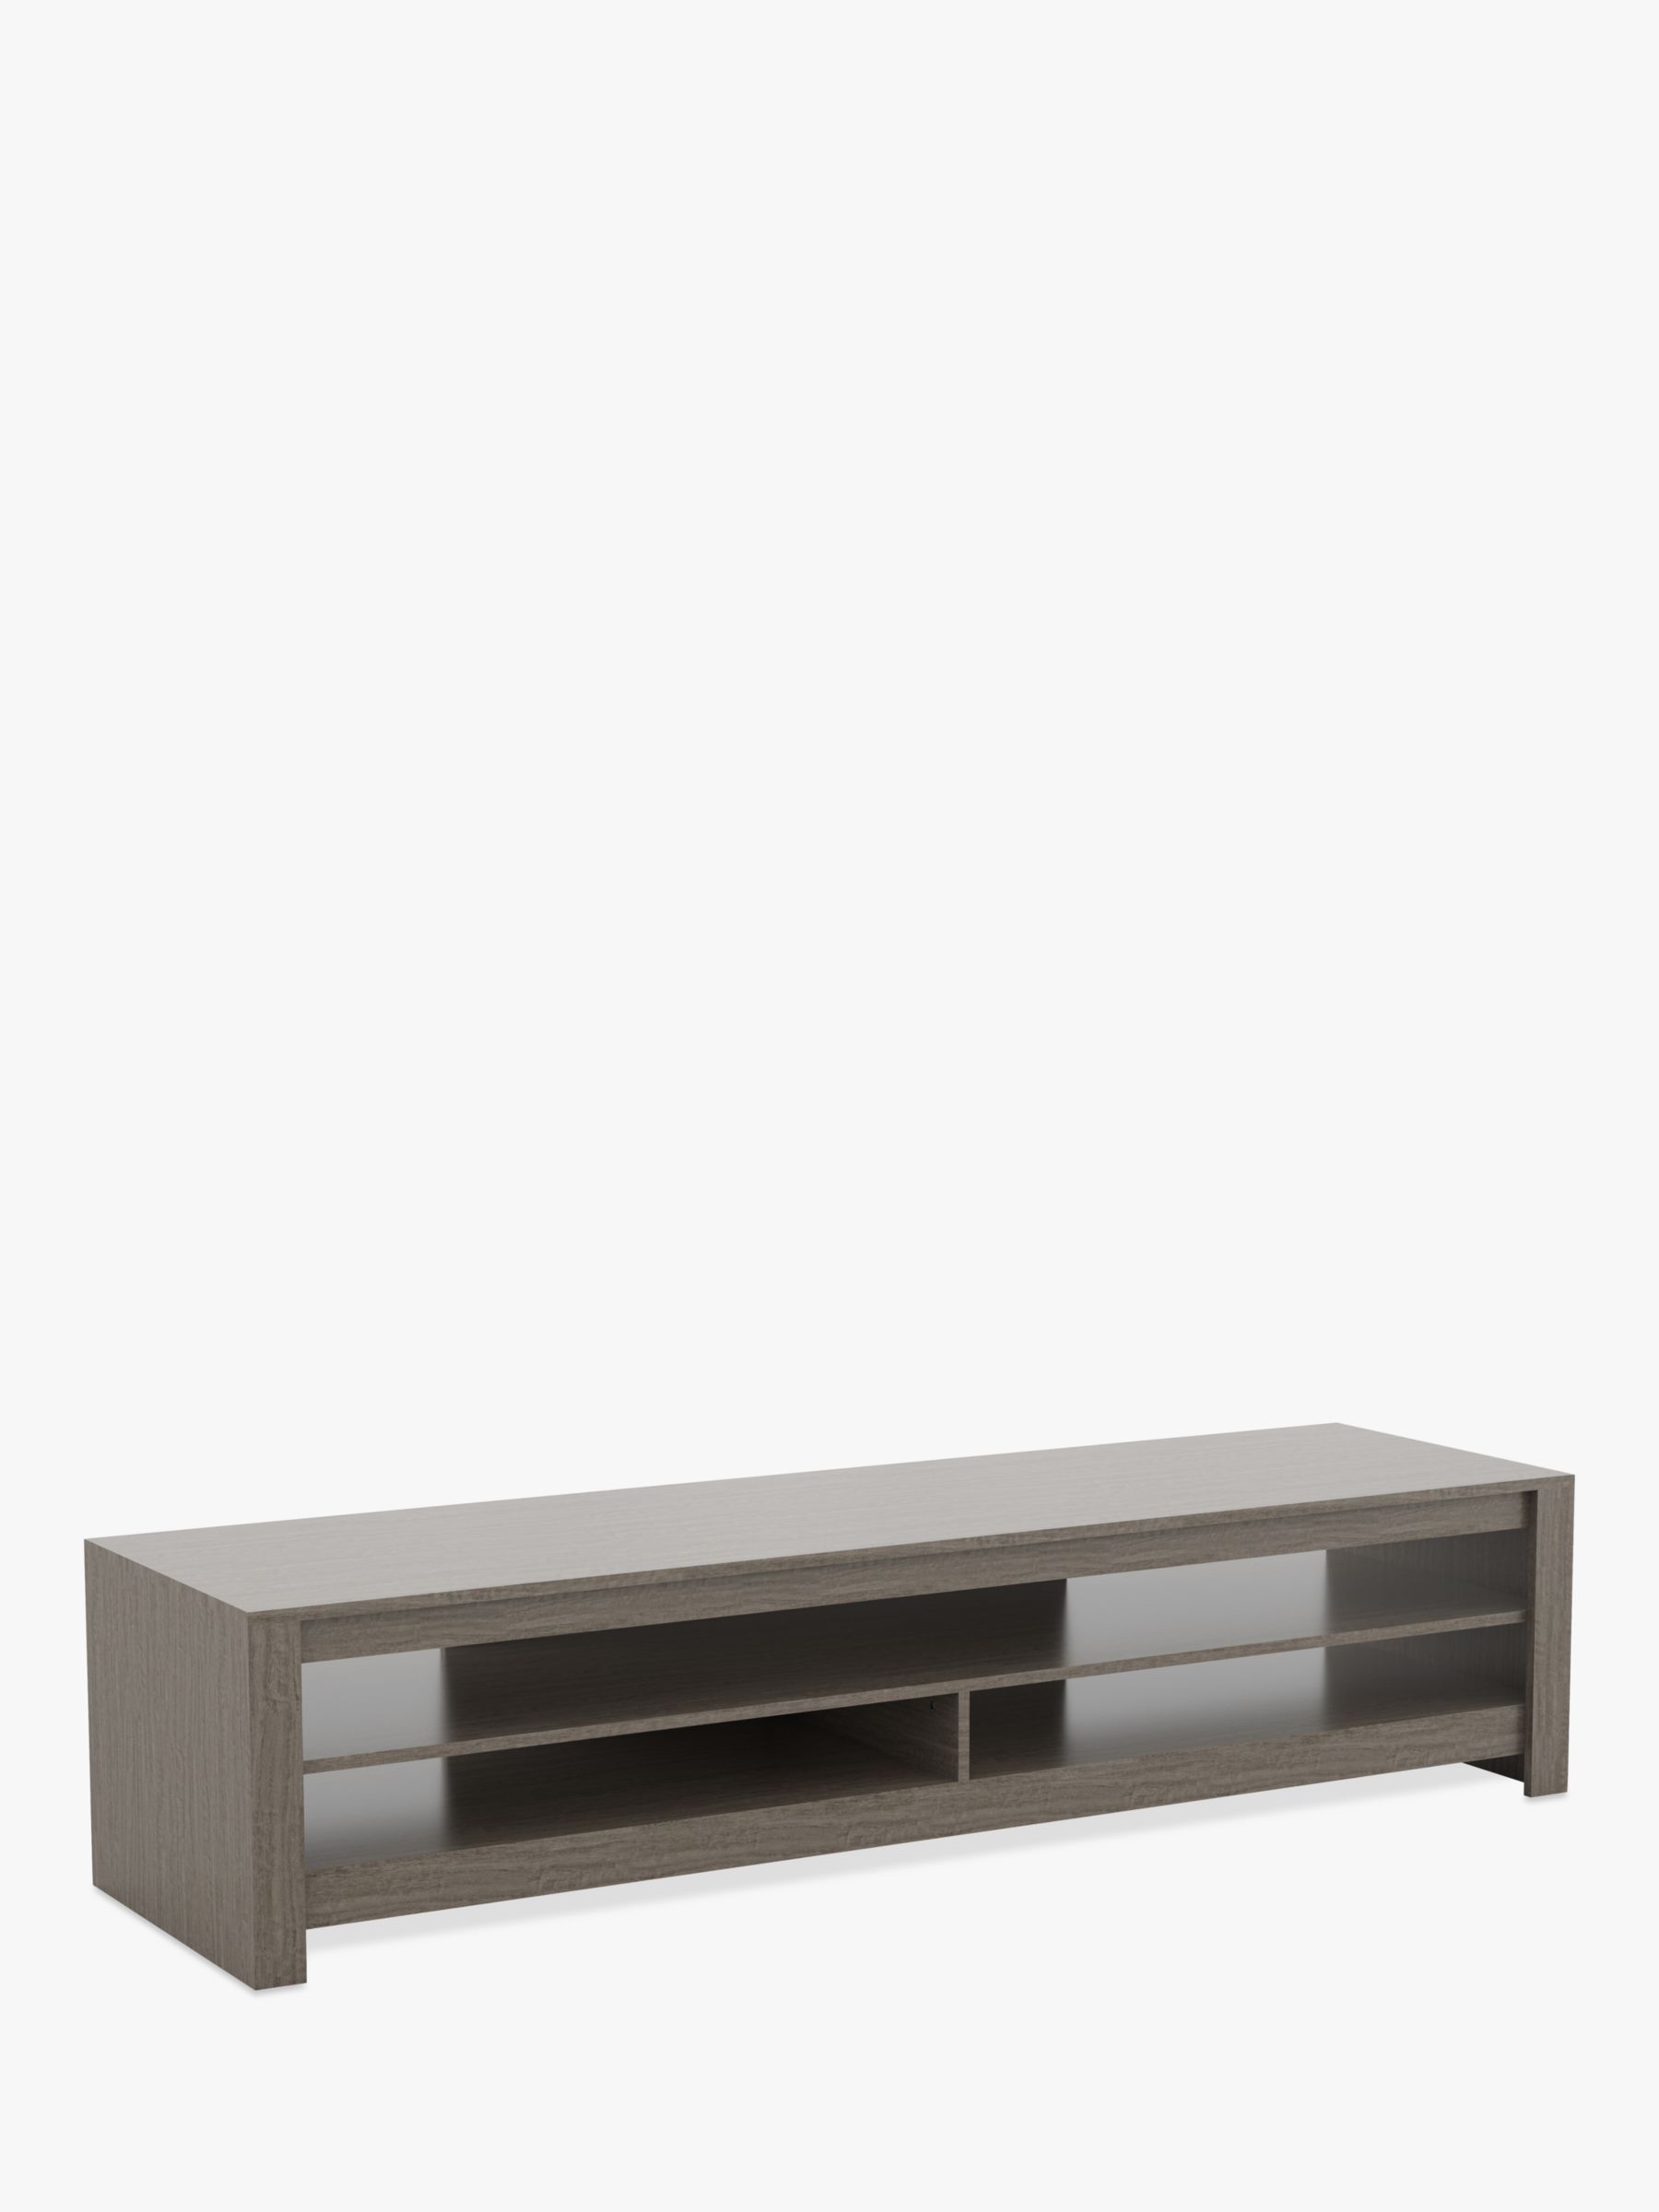 Photo of Avf calibre 180 tv stand for tvs up to 85